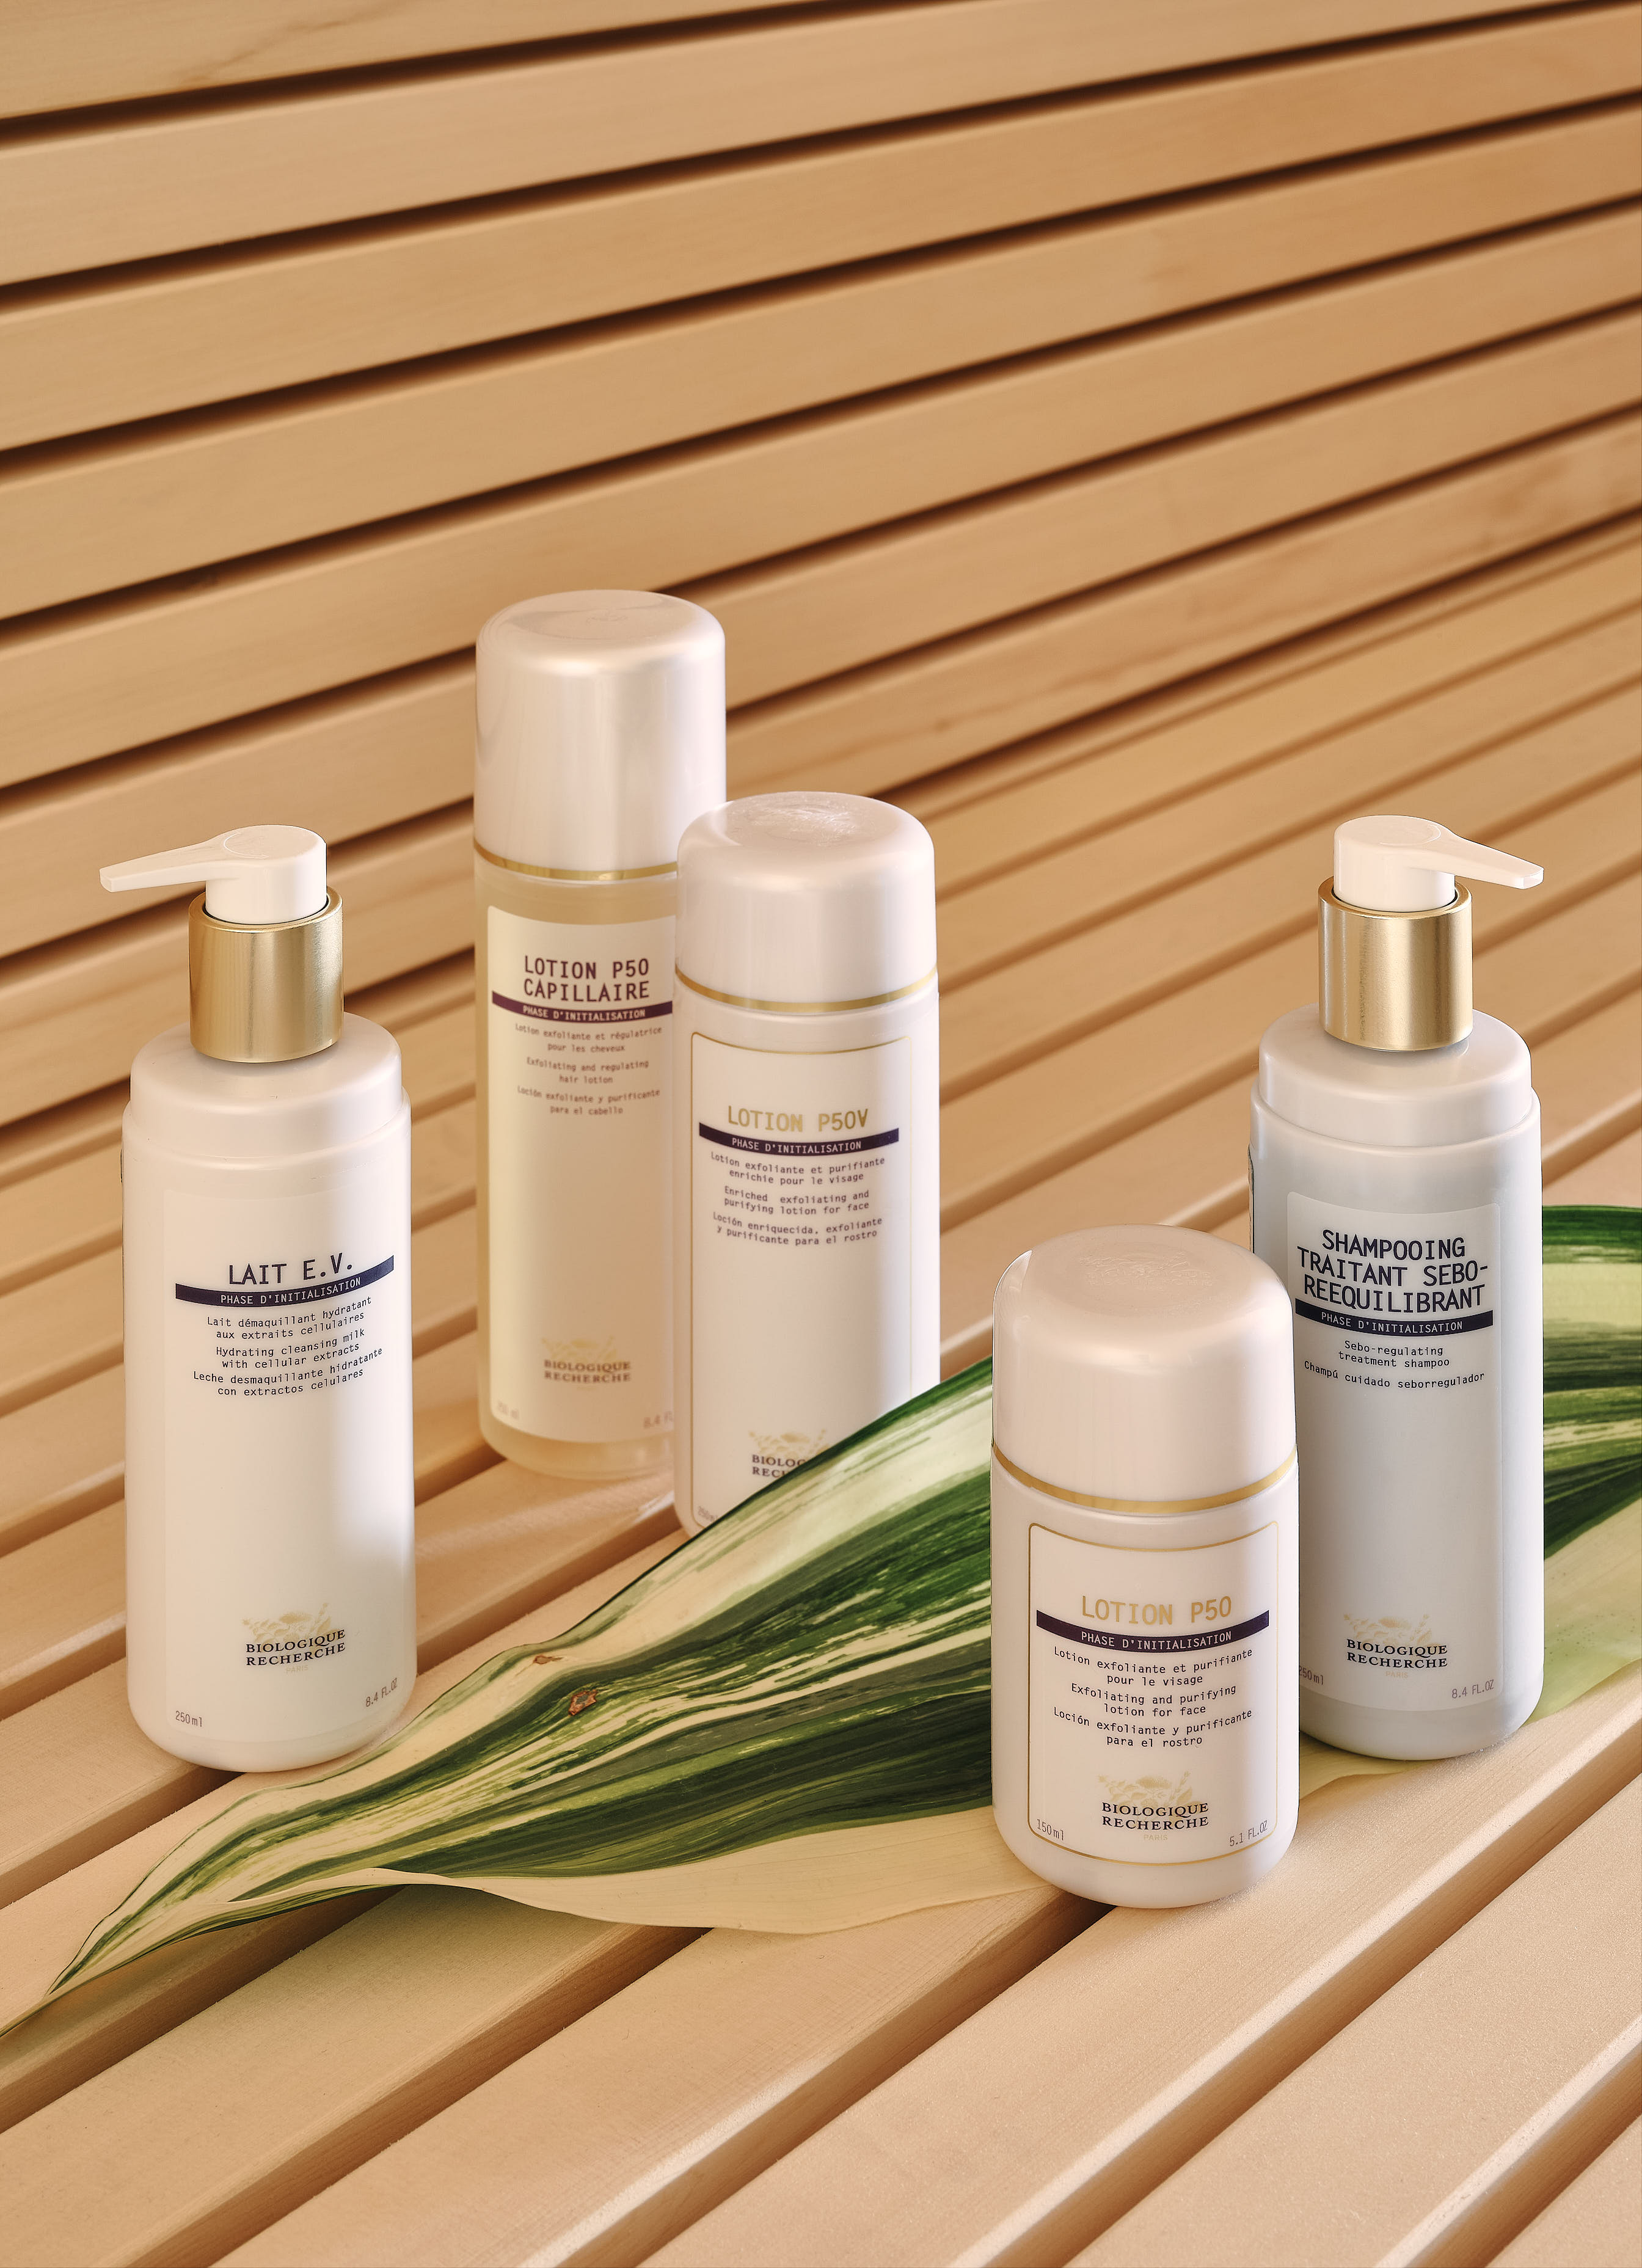 Skincare products from Biologique Recherche